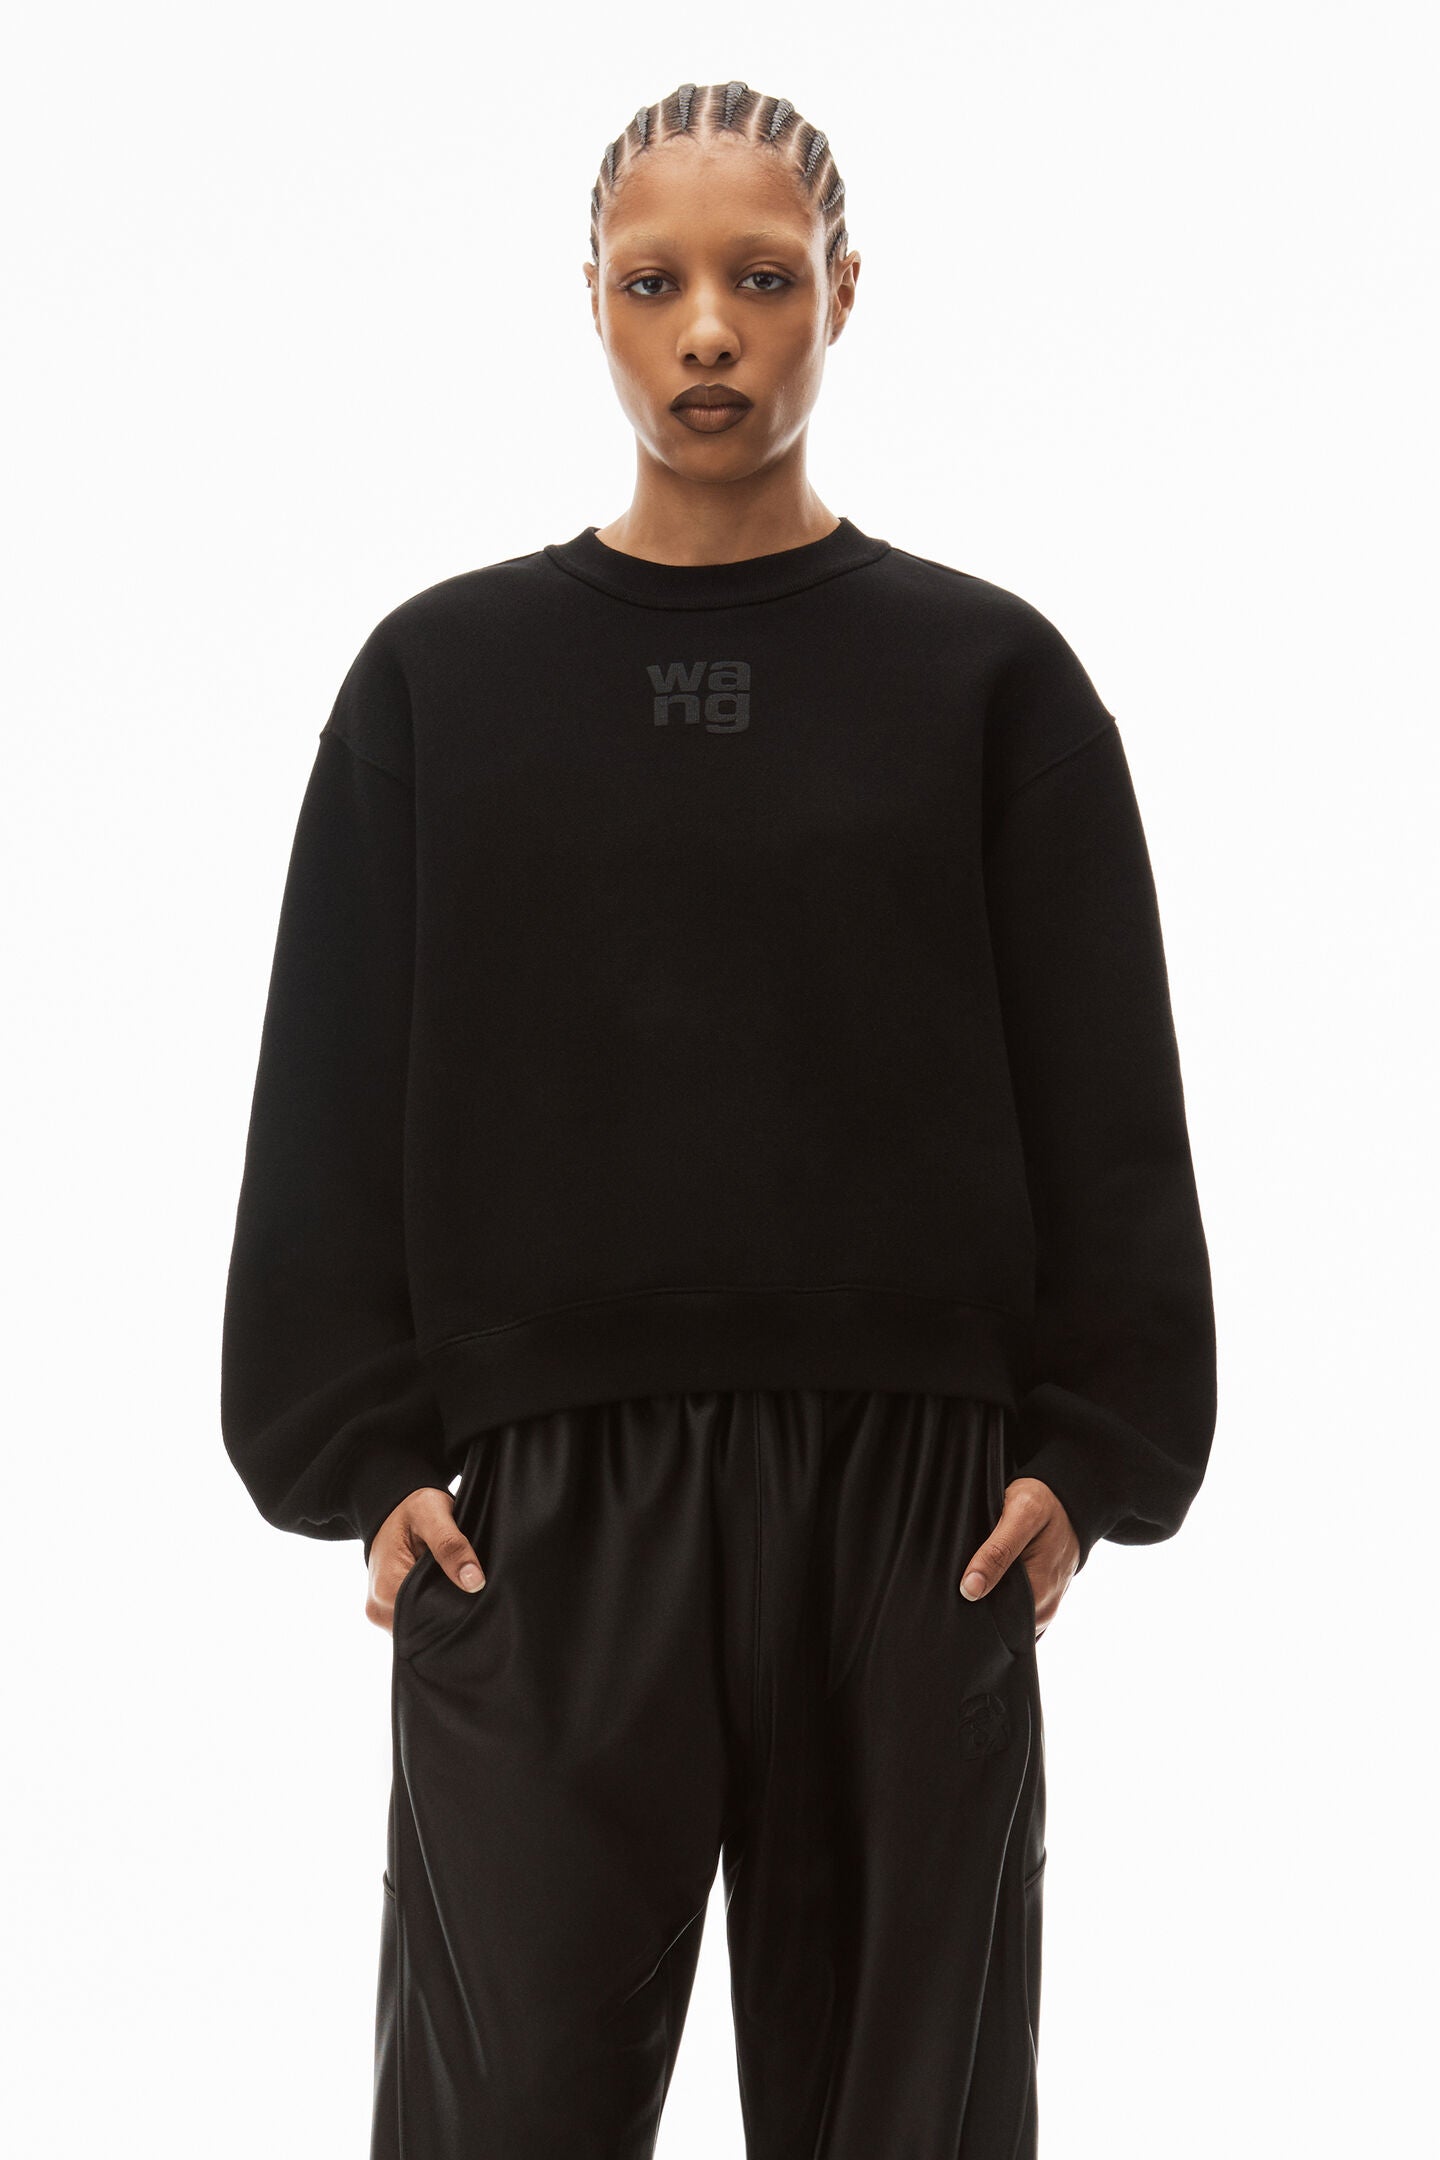 Alexander Wang Essential Terry Crew Sweatshirt With Puff Logo in Black available at TNT The New Trend Australia.